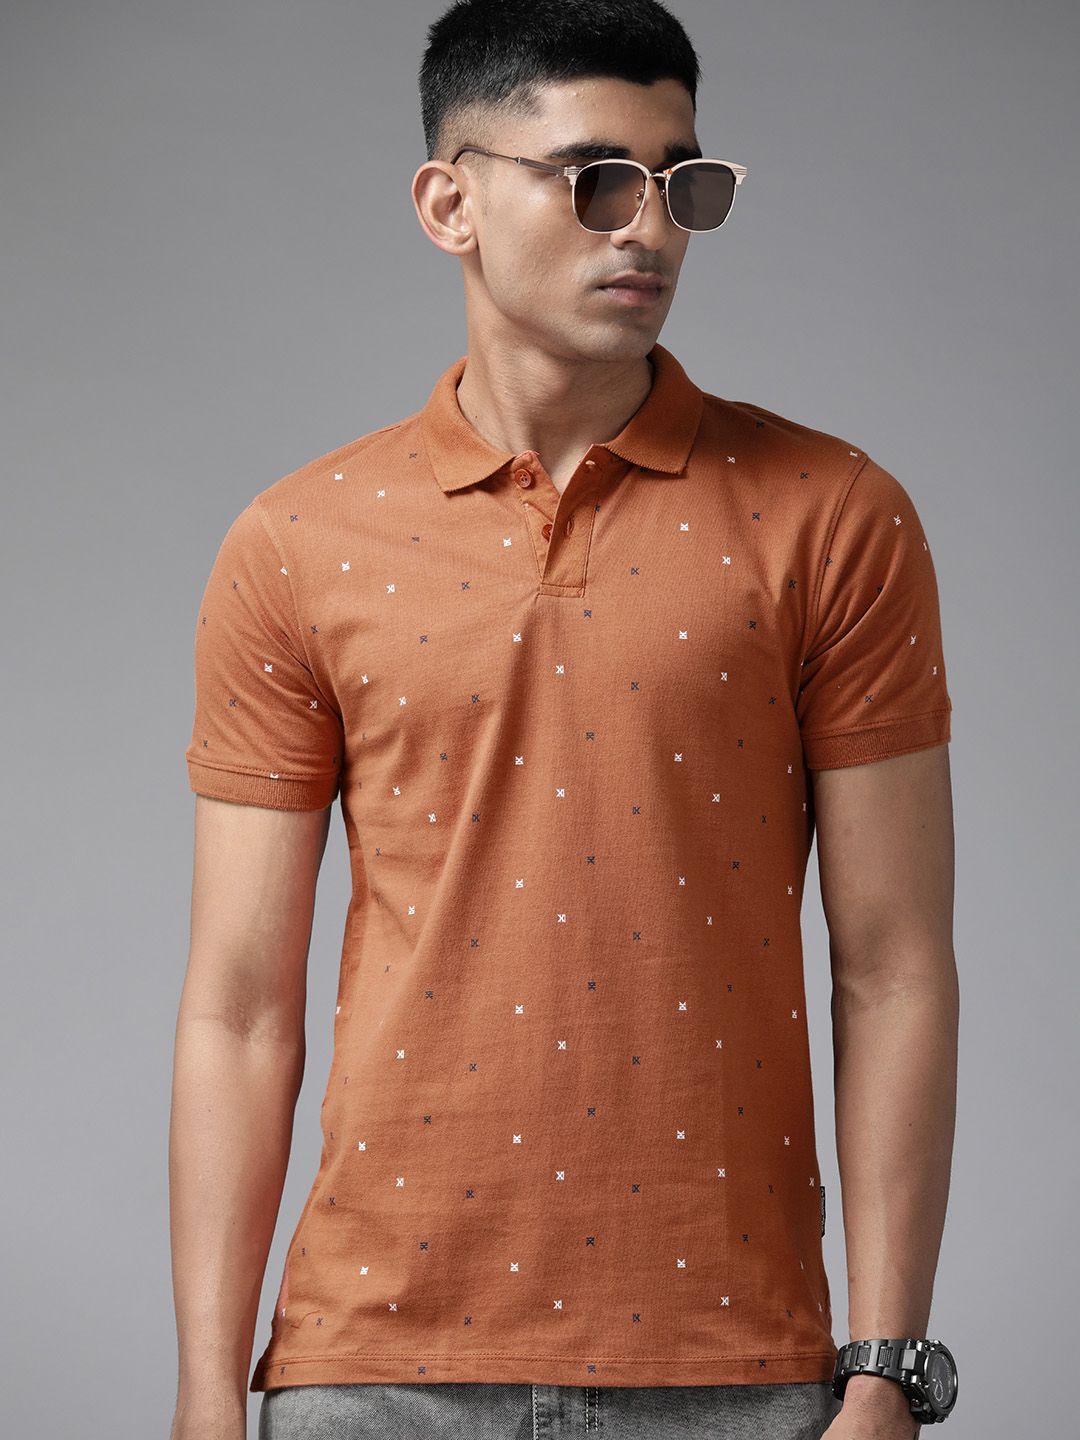 the roadster lifestyle co. printed polo collar pure cotton t-shirt